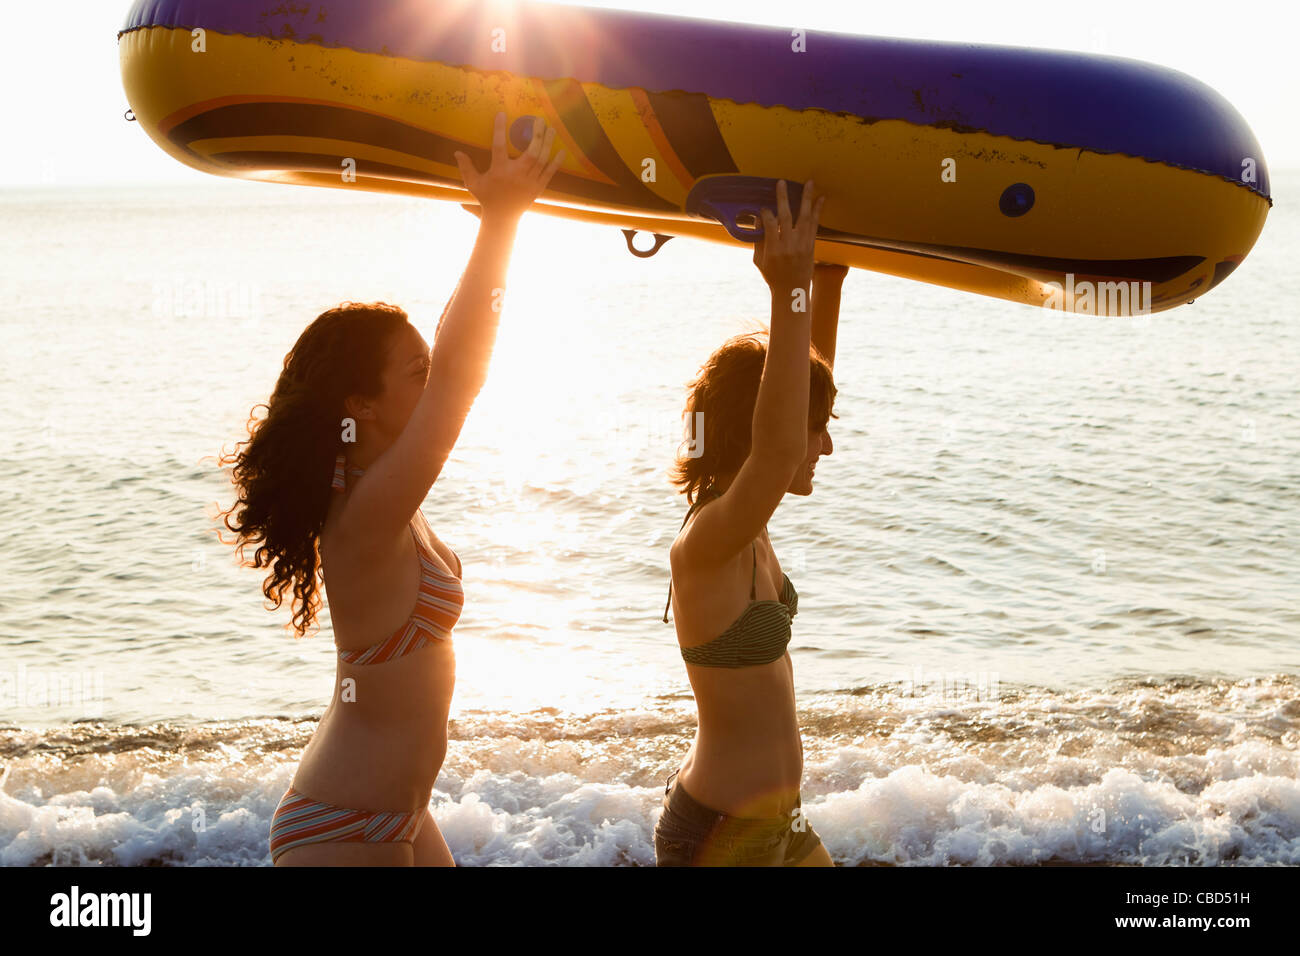 Women carrying inflatable boat on beach Stock Photo